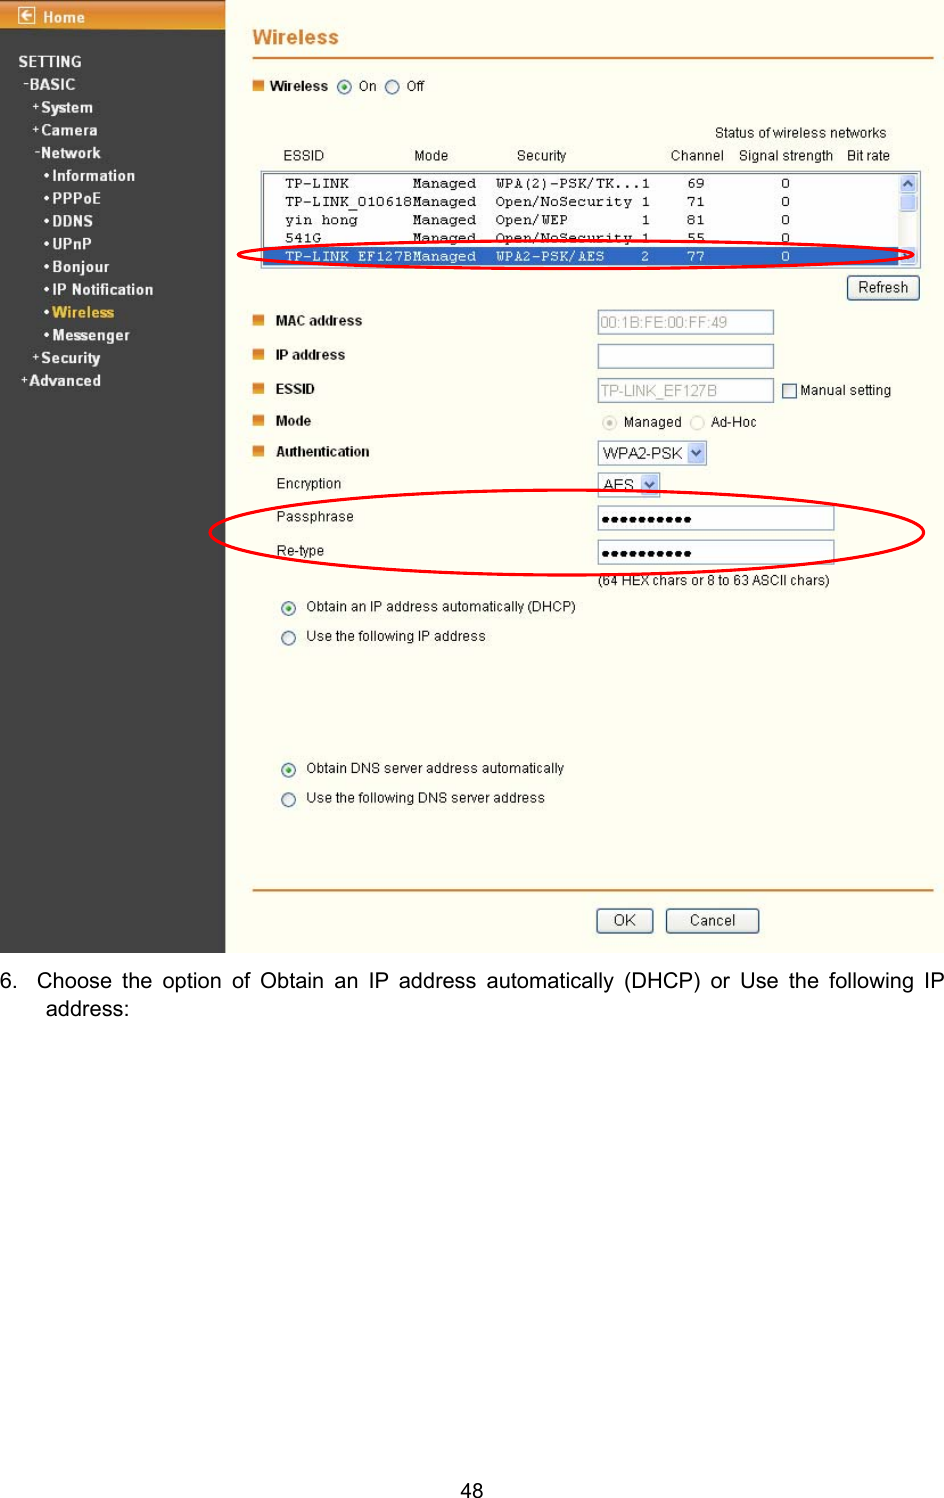 48  6.  Choose the option of Obtain an IP address automatically (DHCP) or Use the following IP address: 